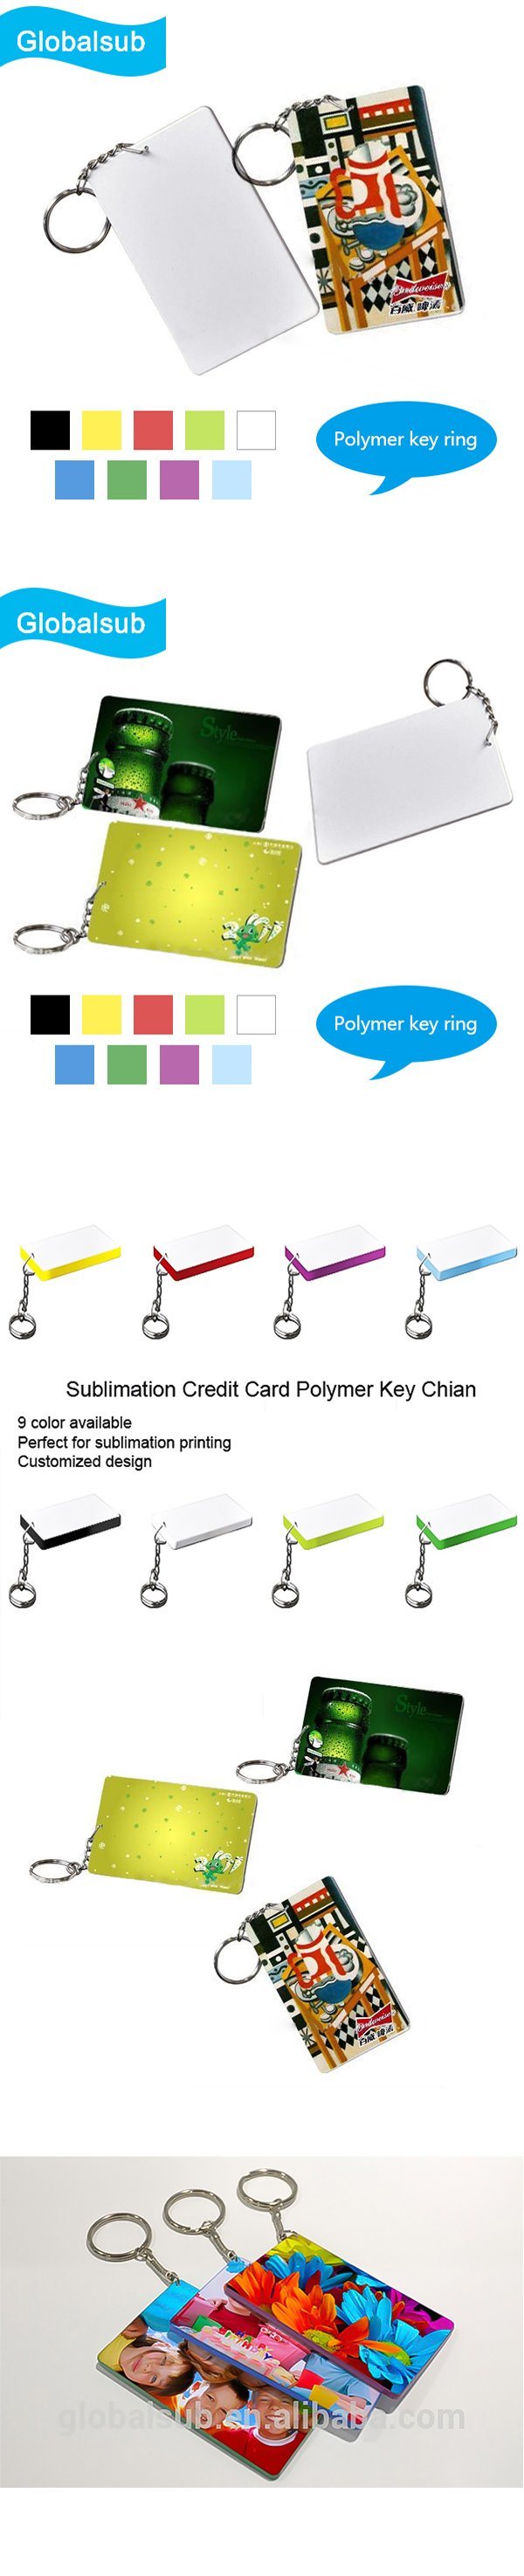 Promotional Sublimation Polymer Keychain for Gifts